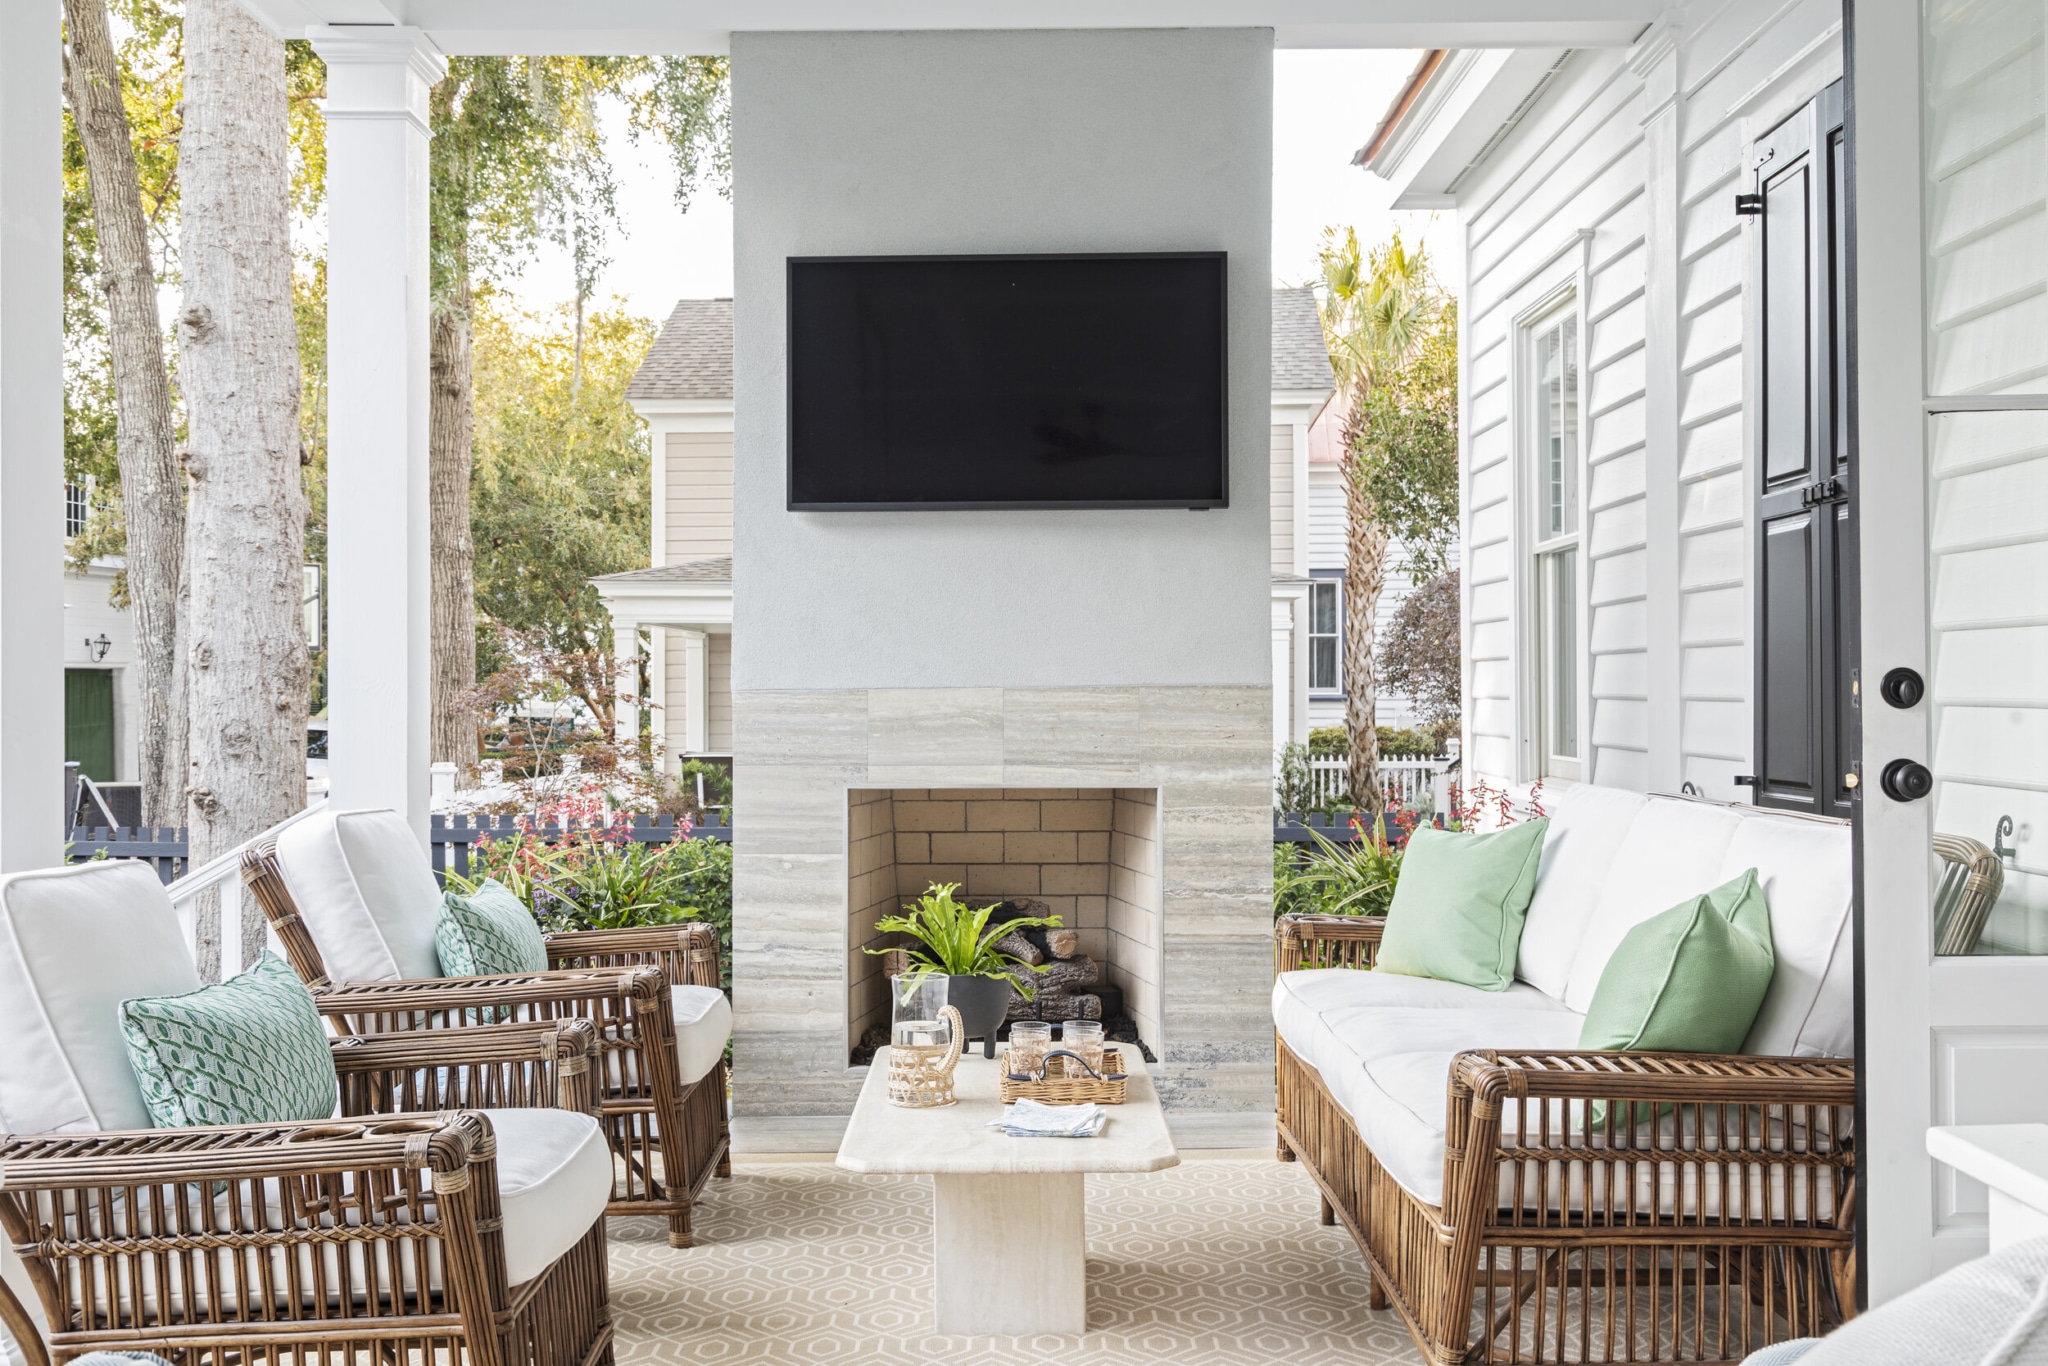 Allison Elebash Design | Julia Lynn Photography Mount Pleasant home - covered porch with outdoor television - wicker - outdoor fireplace